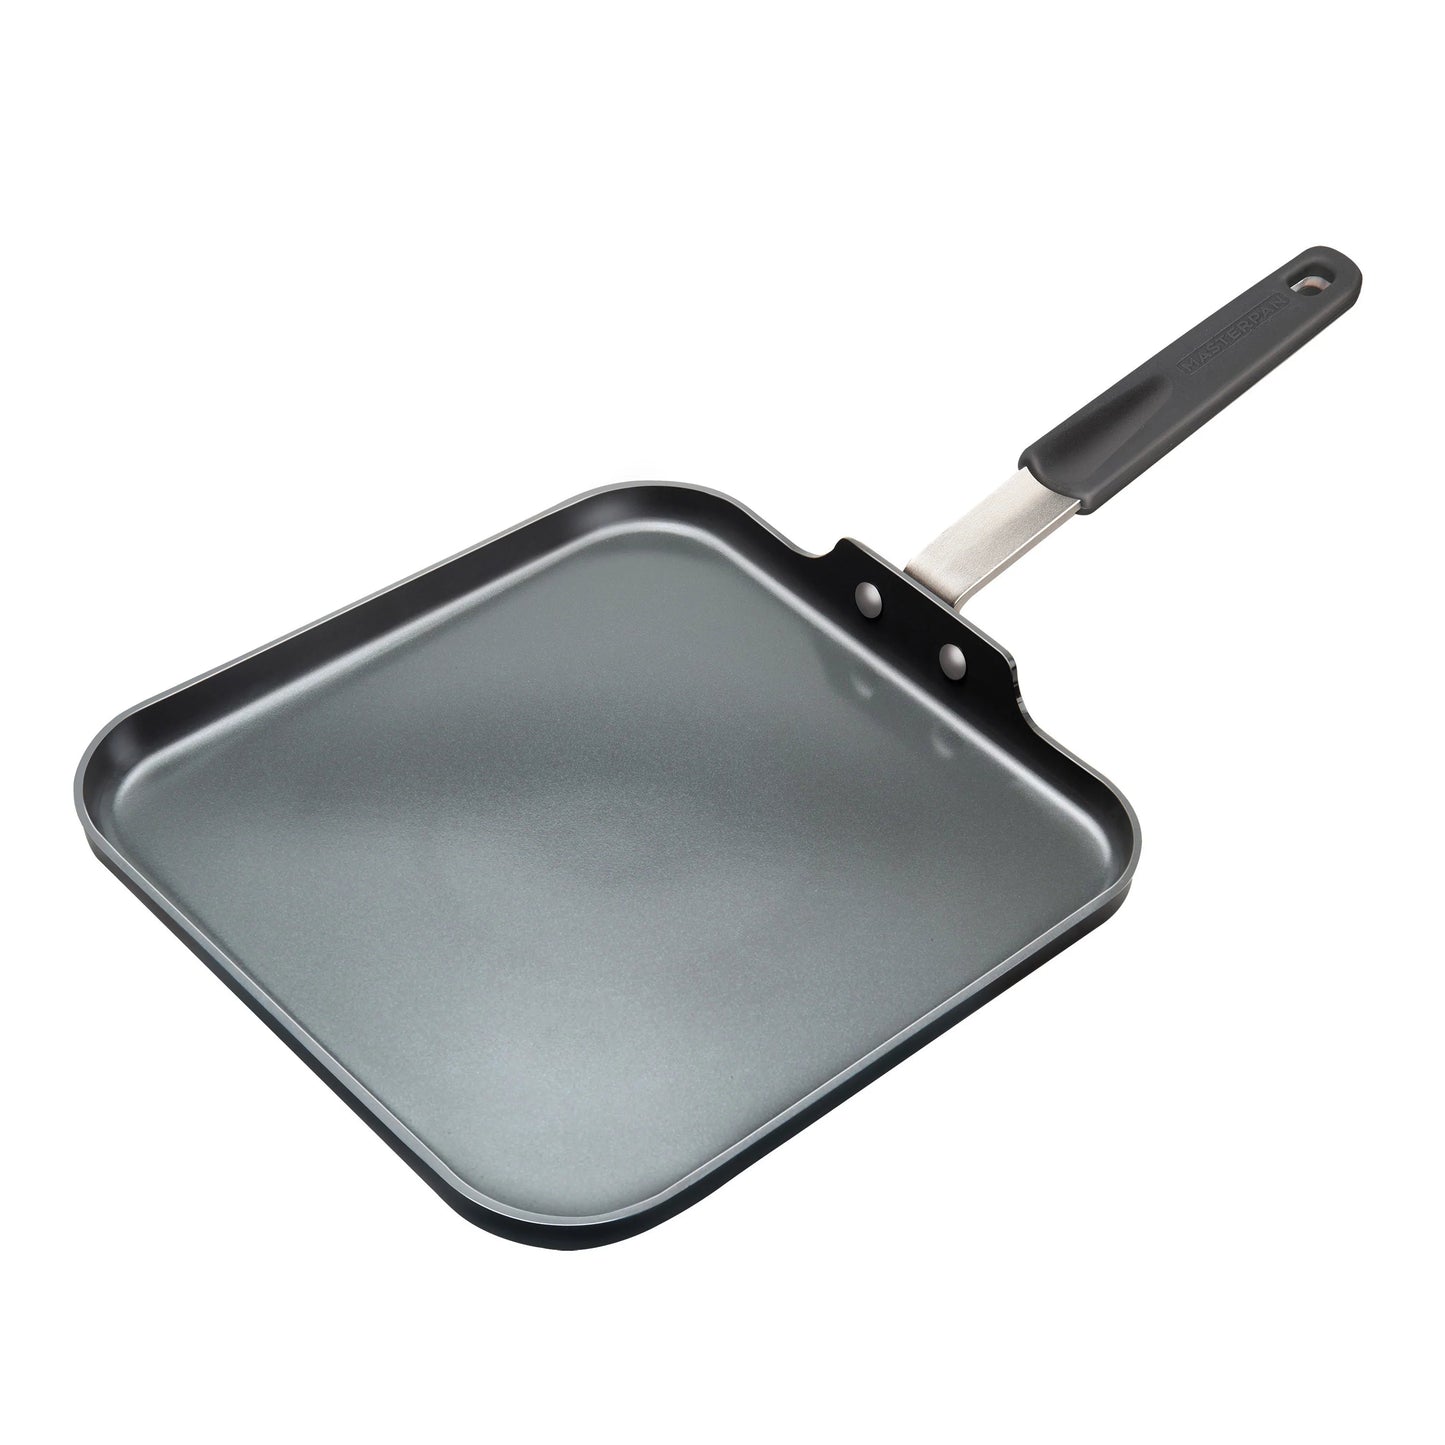 MASTERPAN Chef's Series 11” Griddle Pan / Pancake Pan, Healthy Ceramic Non-stick Aluminum Cookware With Stainless Steel Chef’s Handle